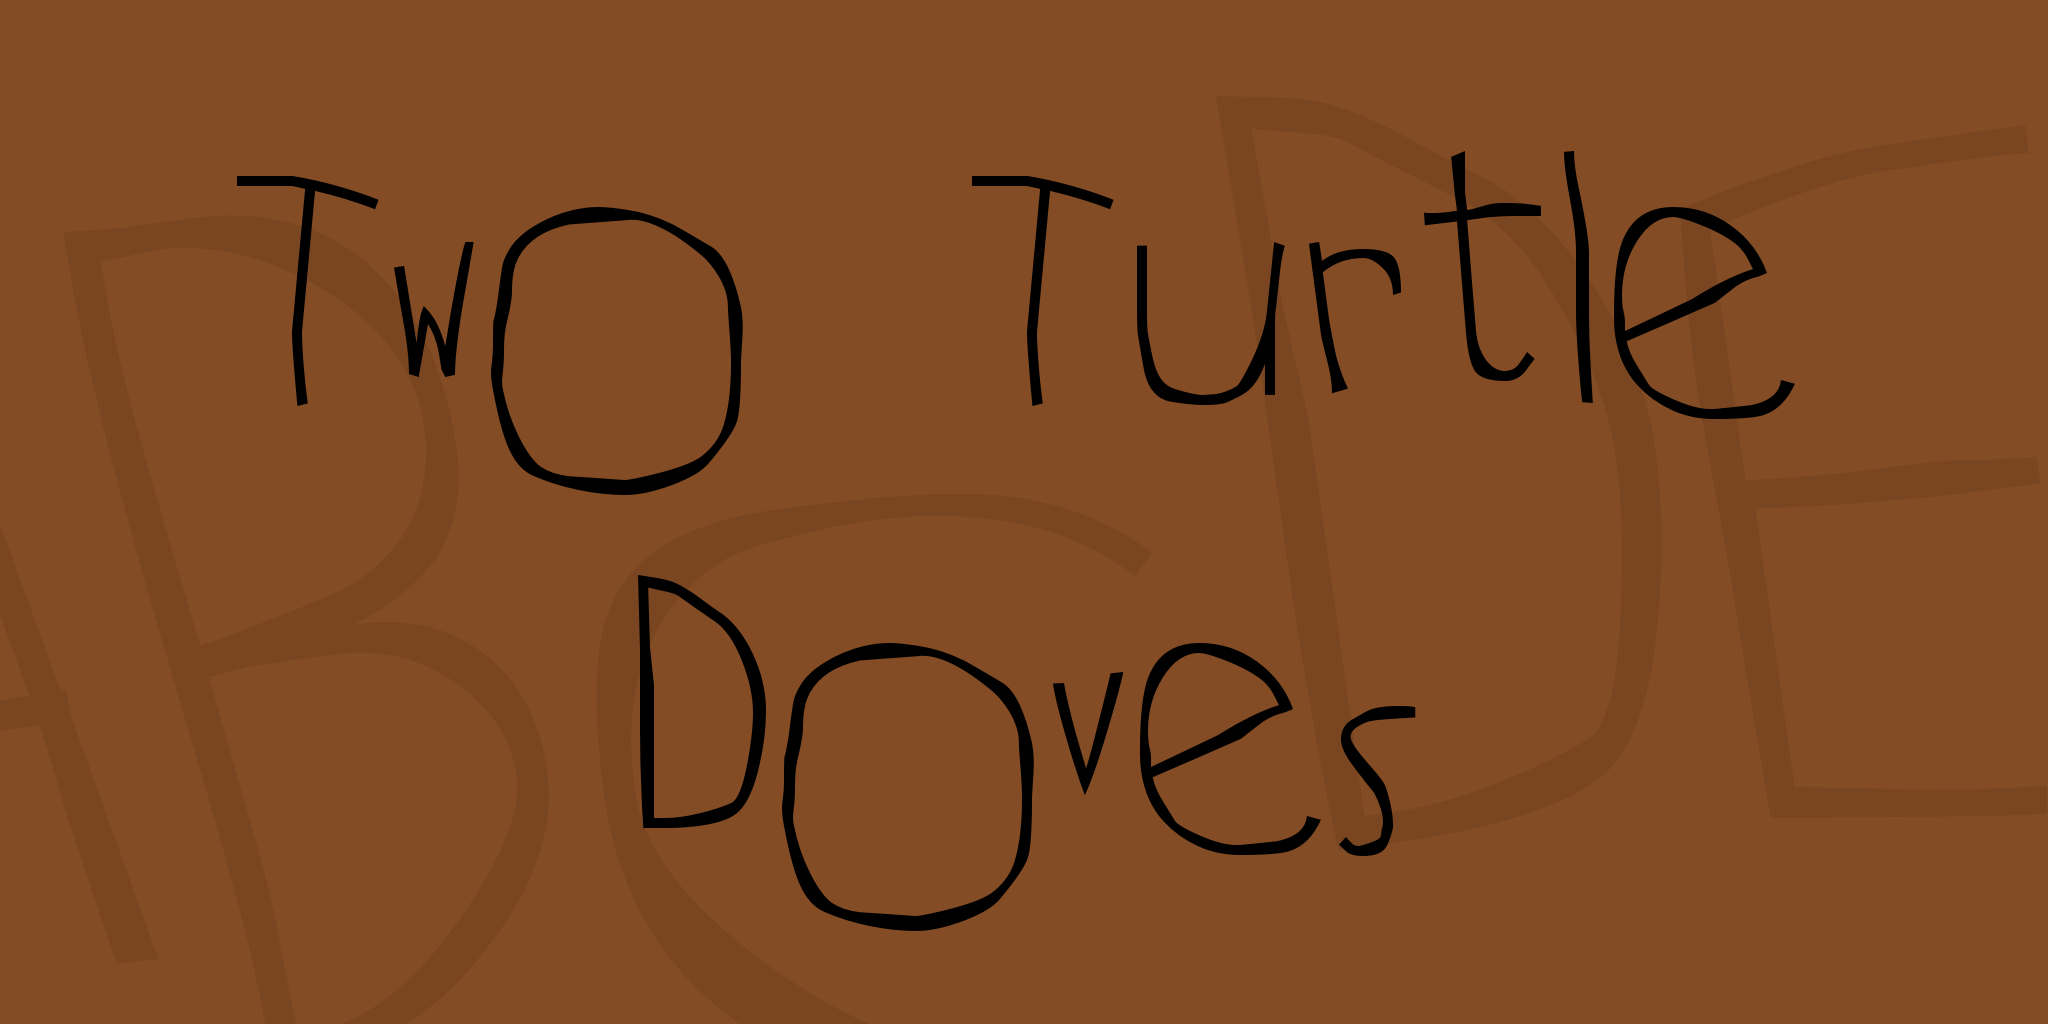 Two Turtle Doves